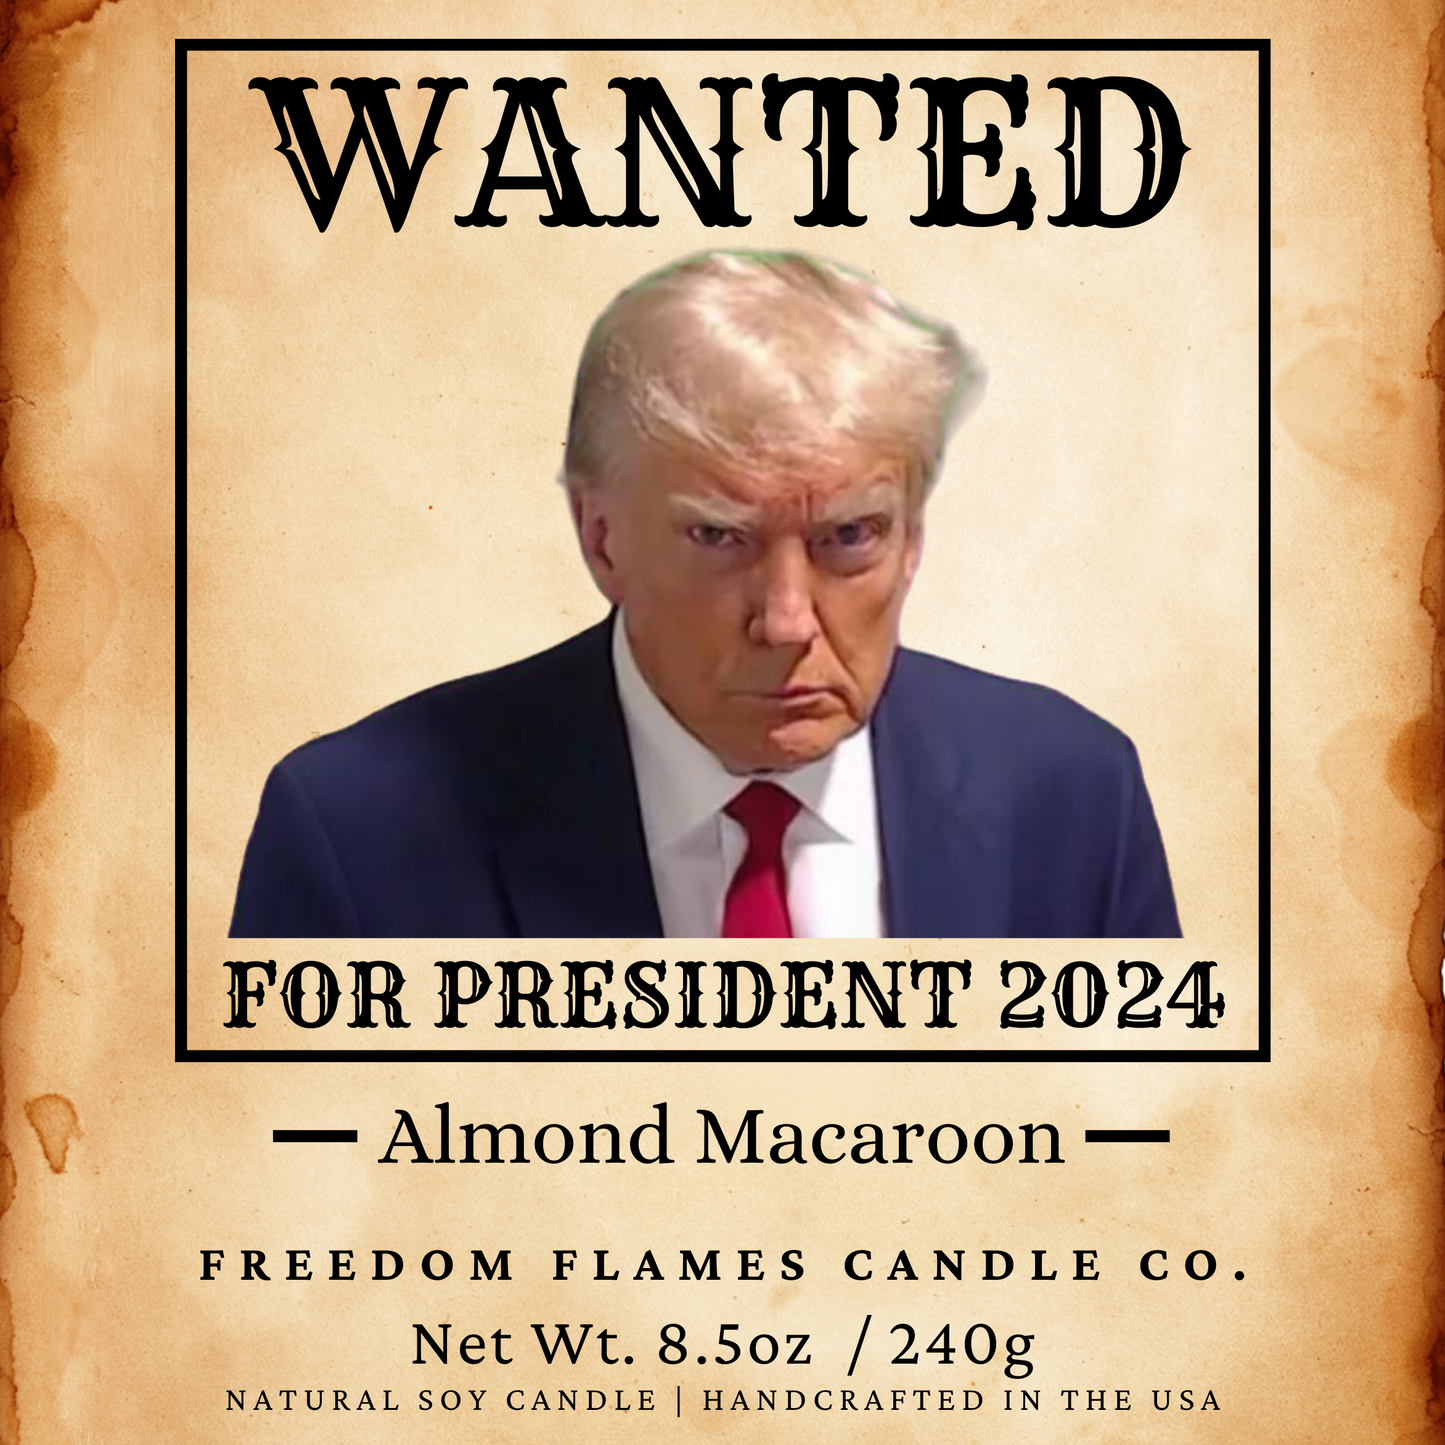 Wanted for President 2024